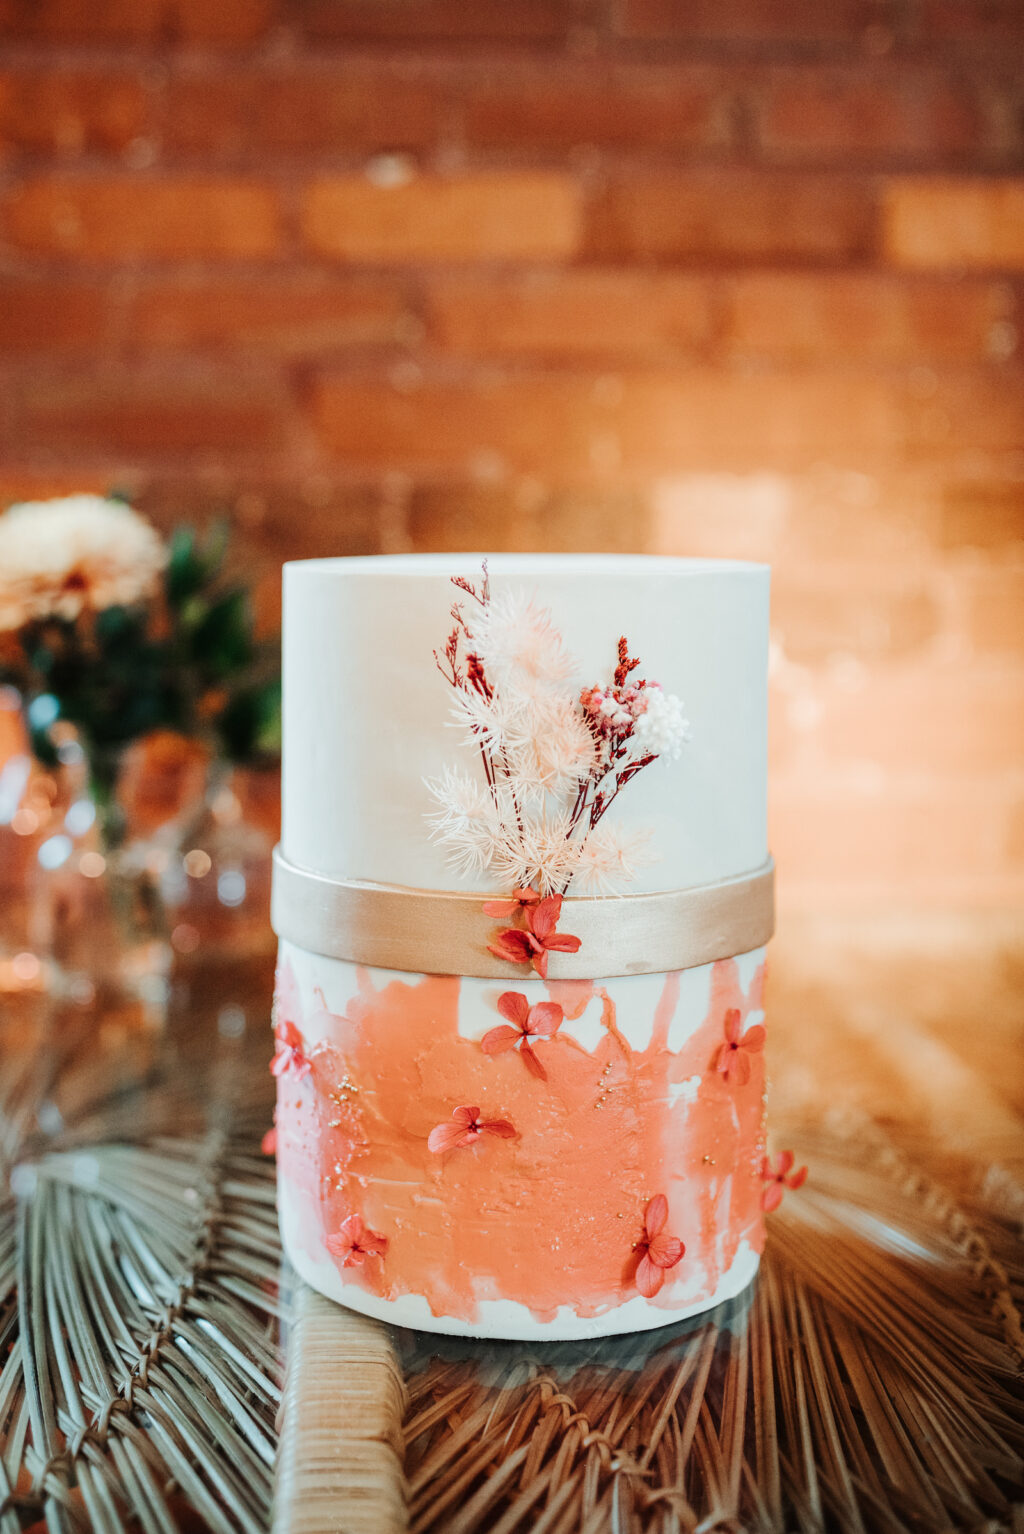 One Tier Hand Painted Wedding Cake in Peach, Coral, and Orange | Tampa Bay Baker The Artistic Whisk